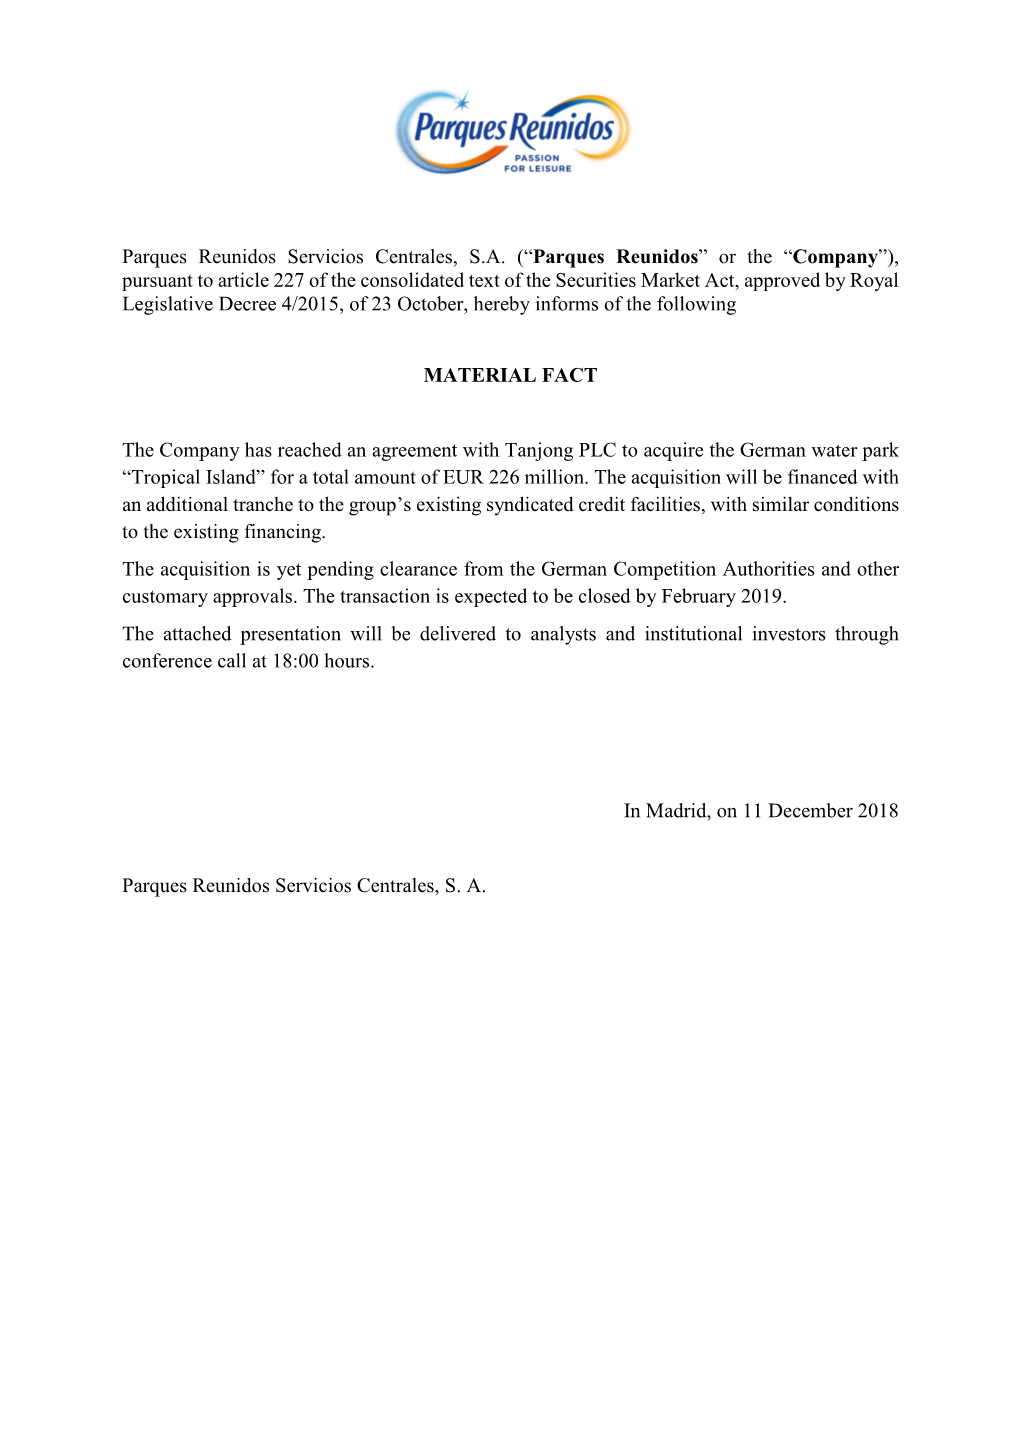 Agreement for the Acquisition of Tropical Islands